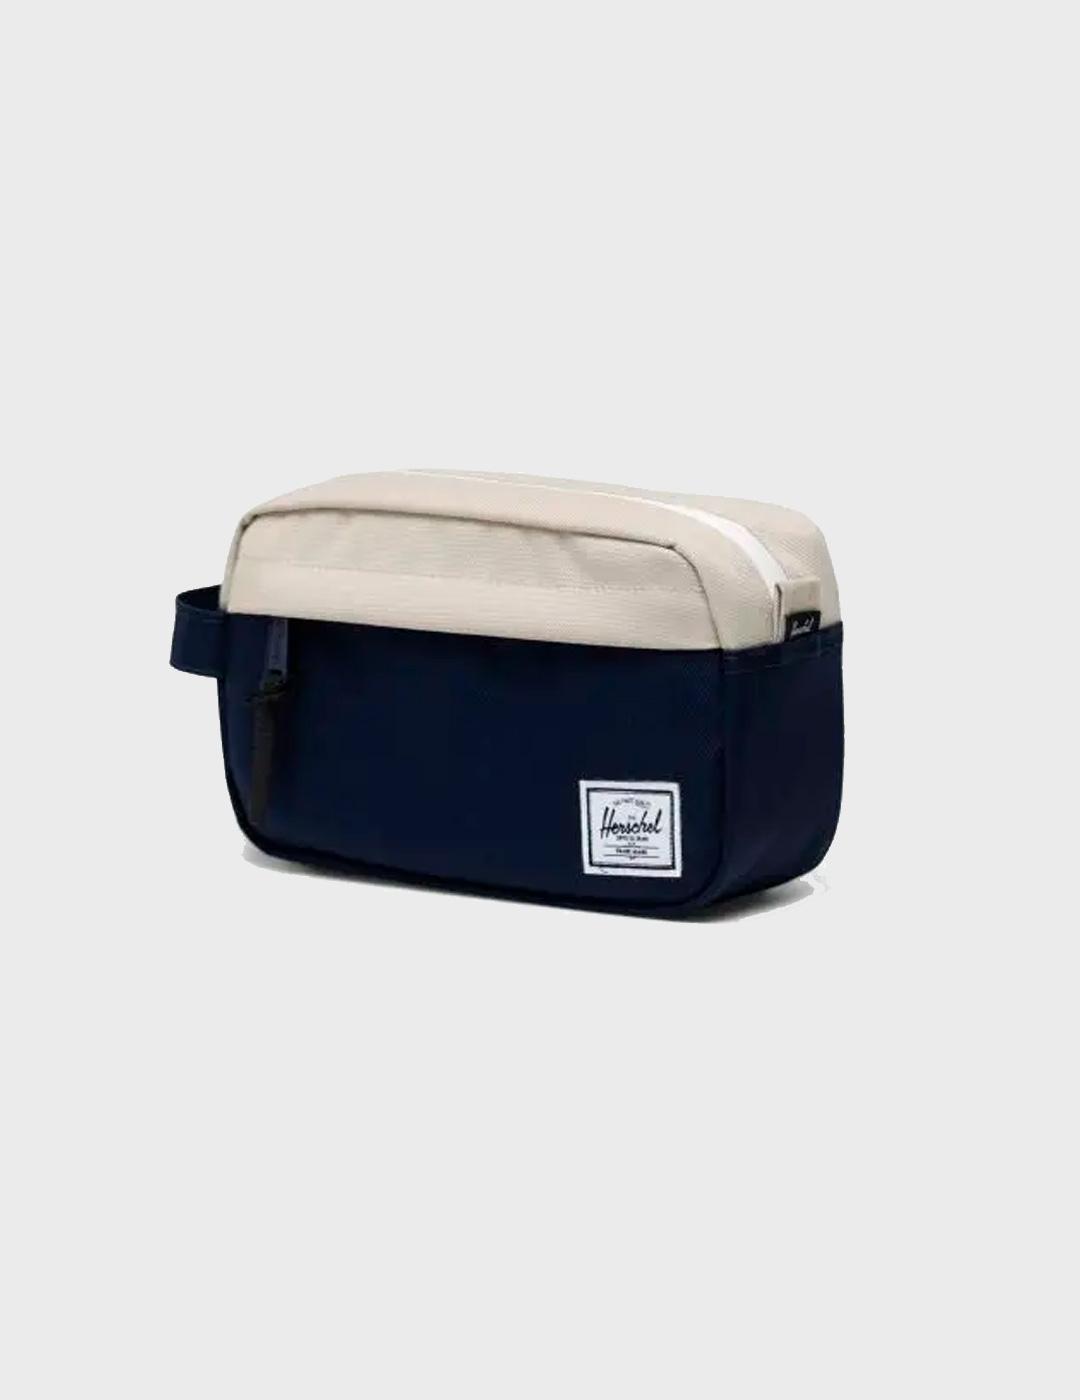 Neceser Herschell Carry On marino para hombre y mujer